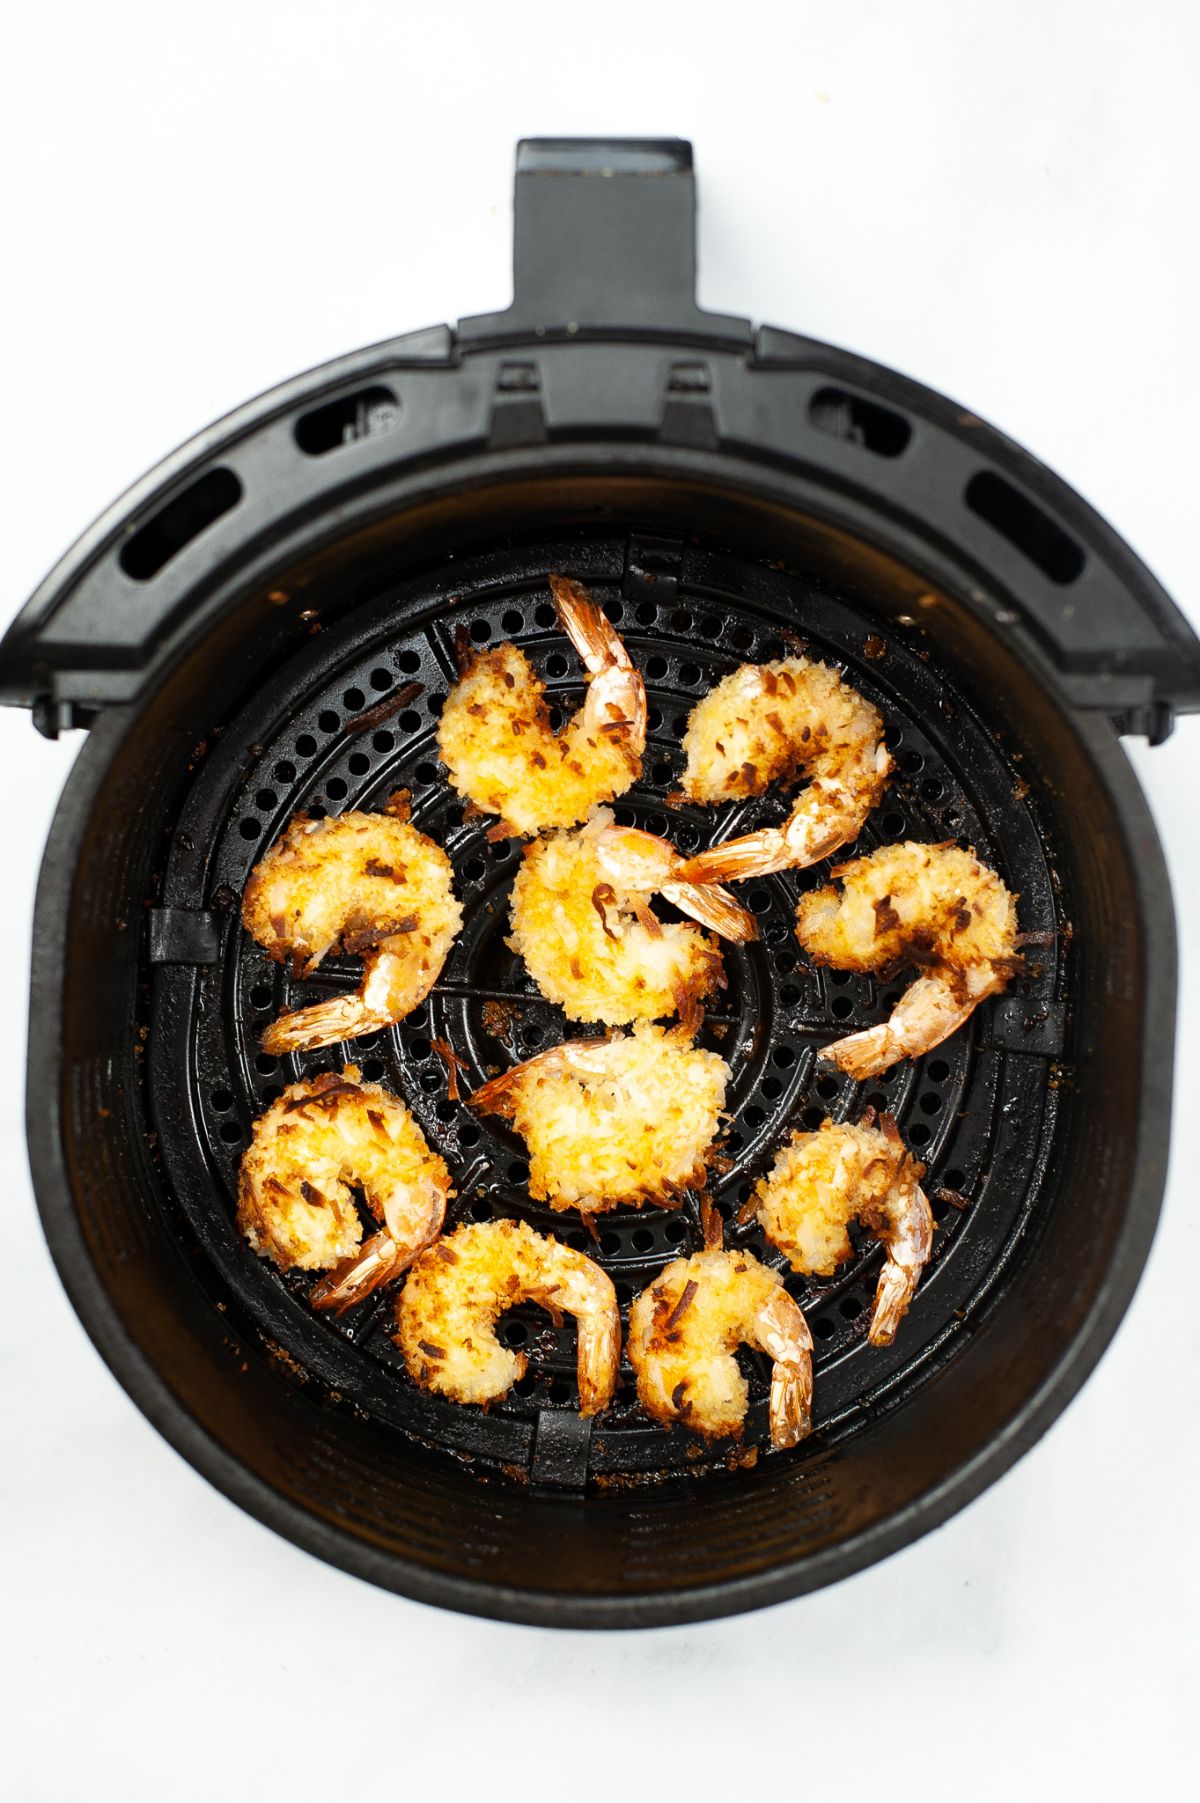 Cooked coconut shrimp in an air fryer basket.